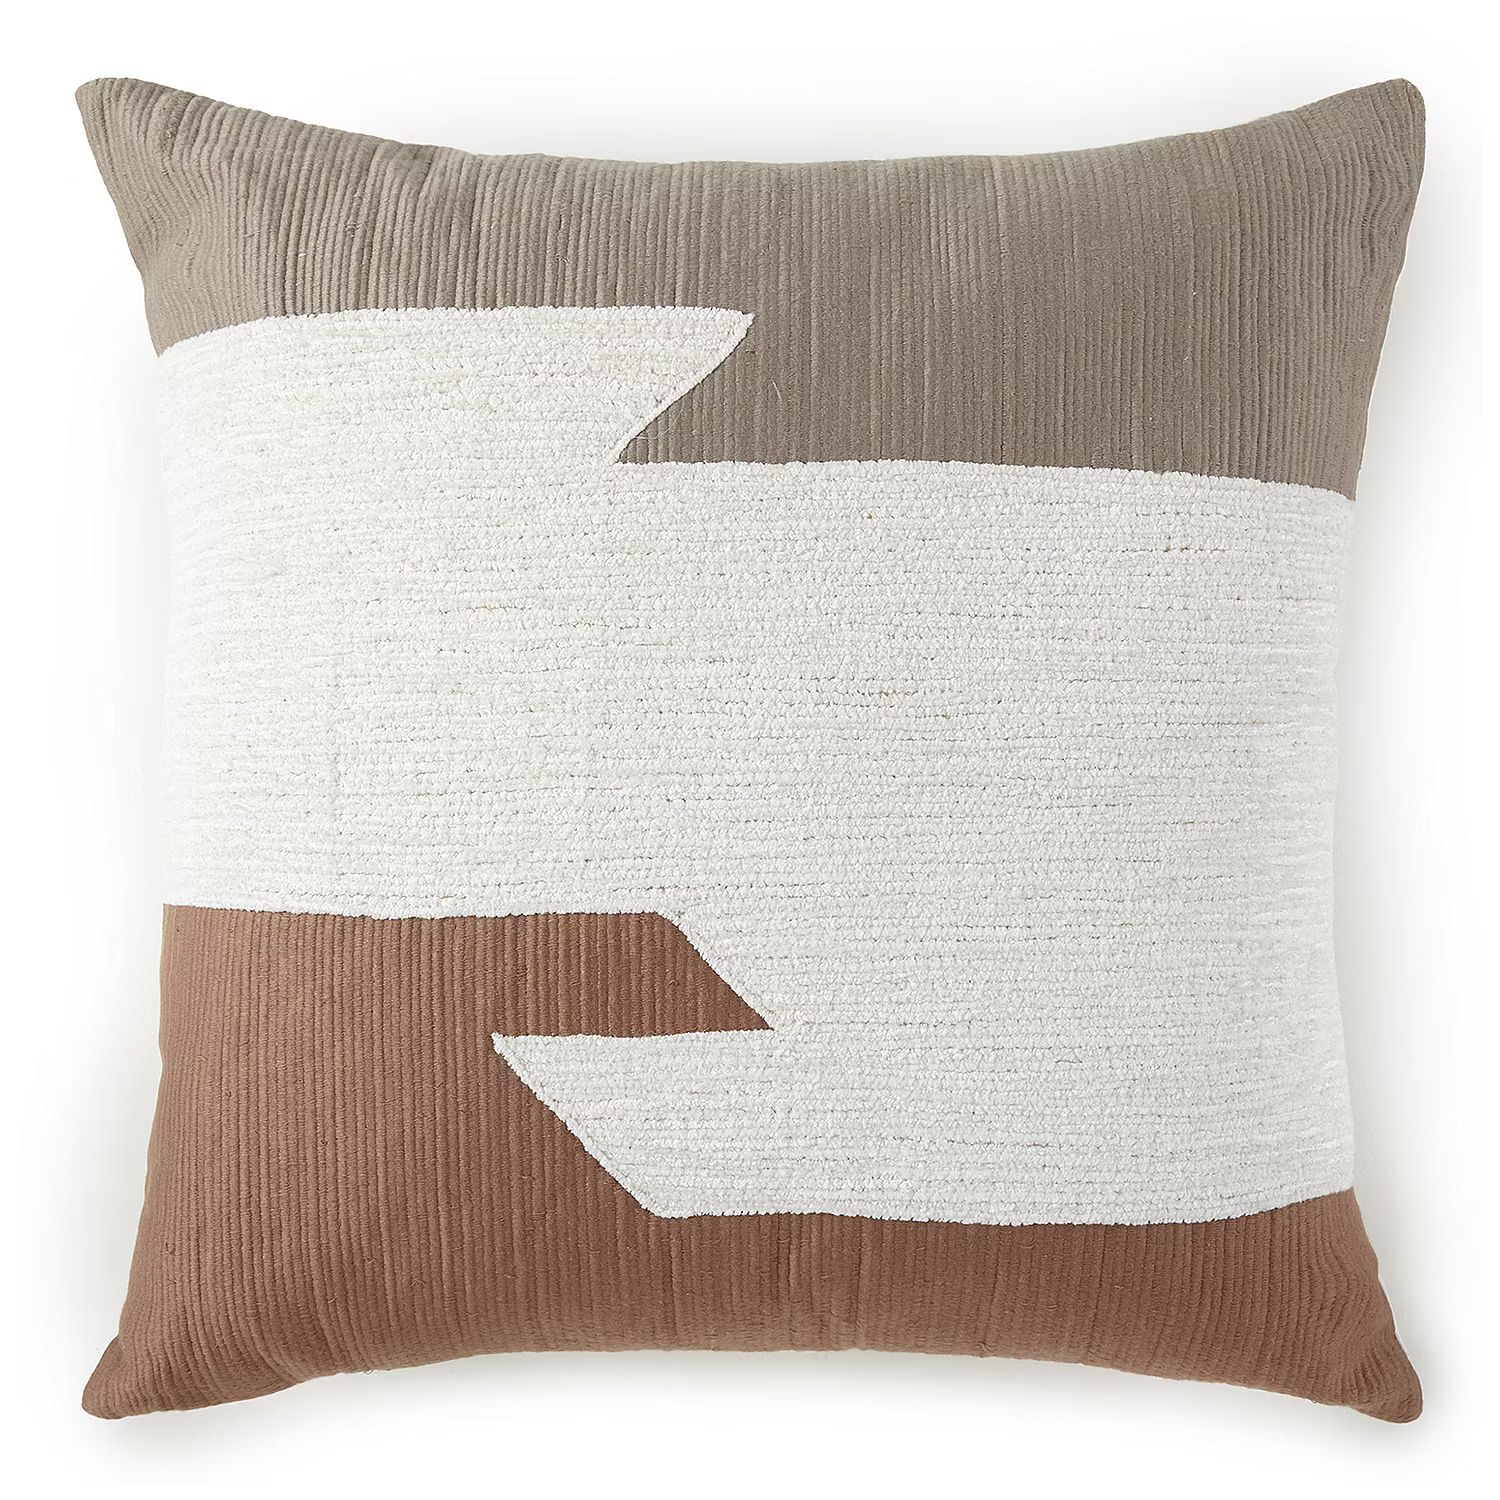 Loom + Forge Abstract Casual Square Throw Pillow | JCPenney